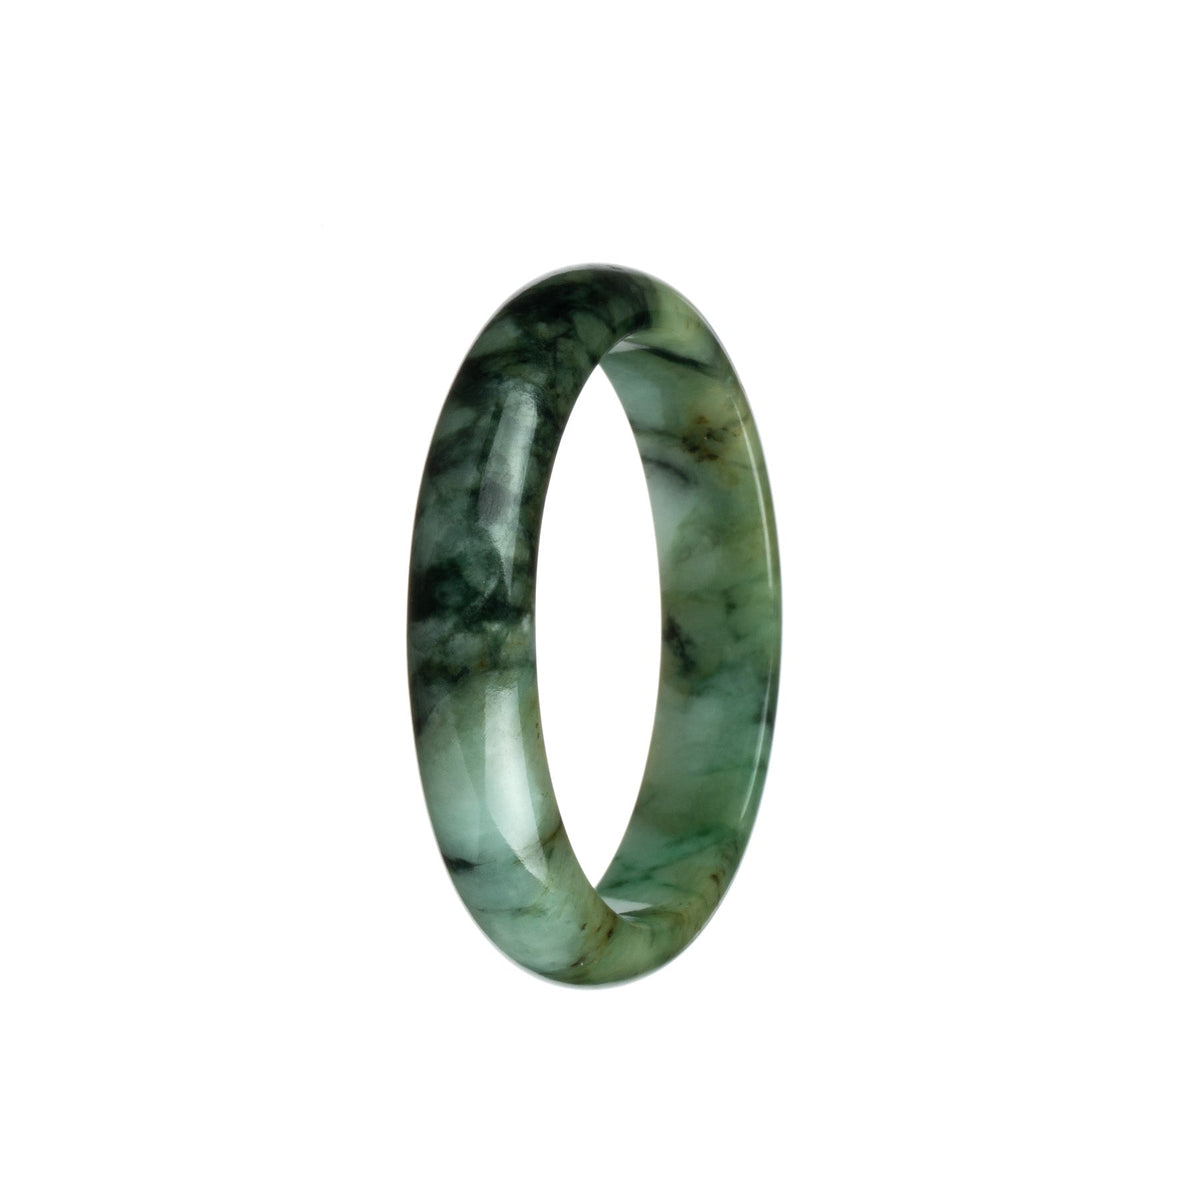 Close-up of a green and black patterned jade bangle with a half moon shape, certified as Type A.